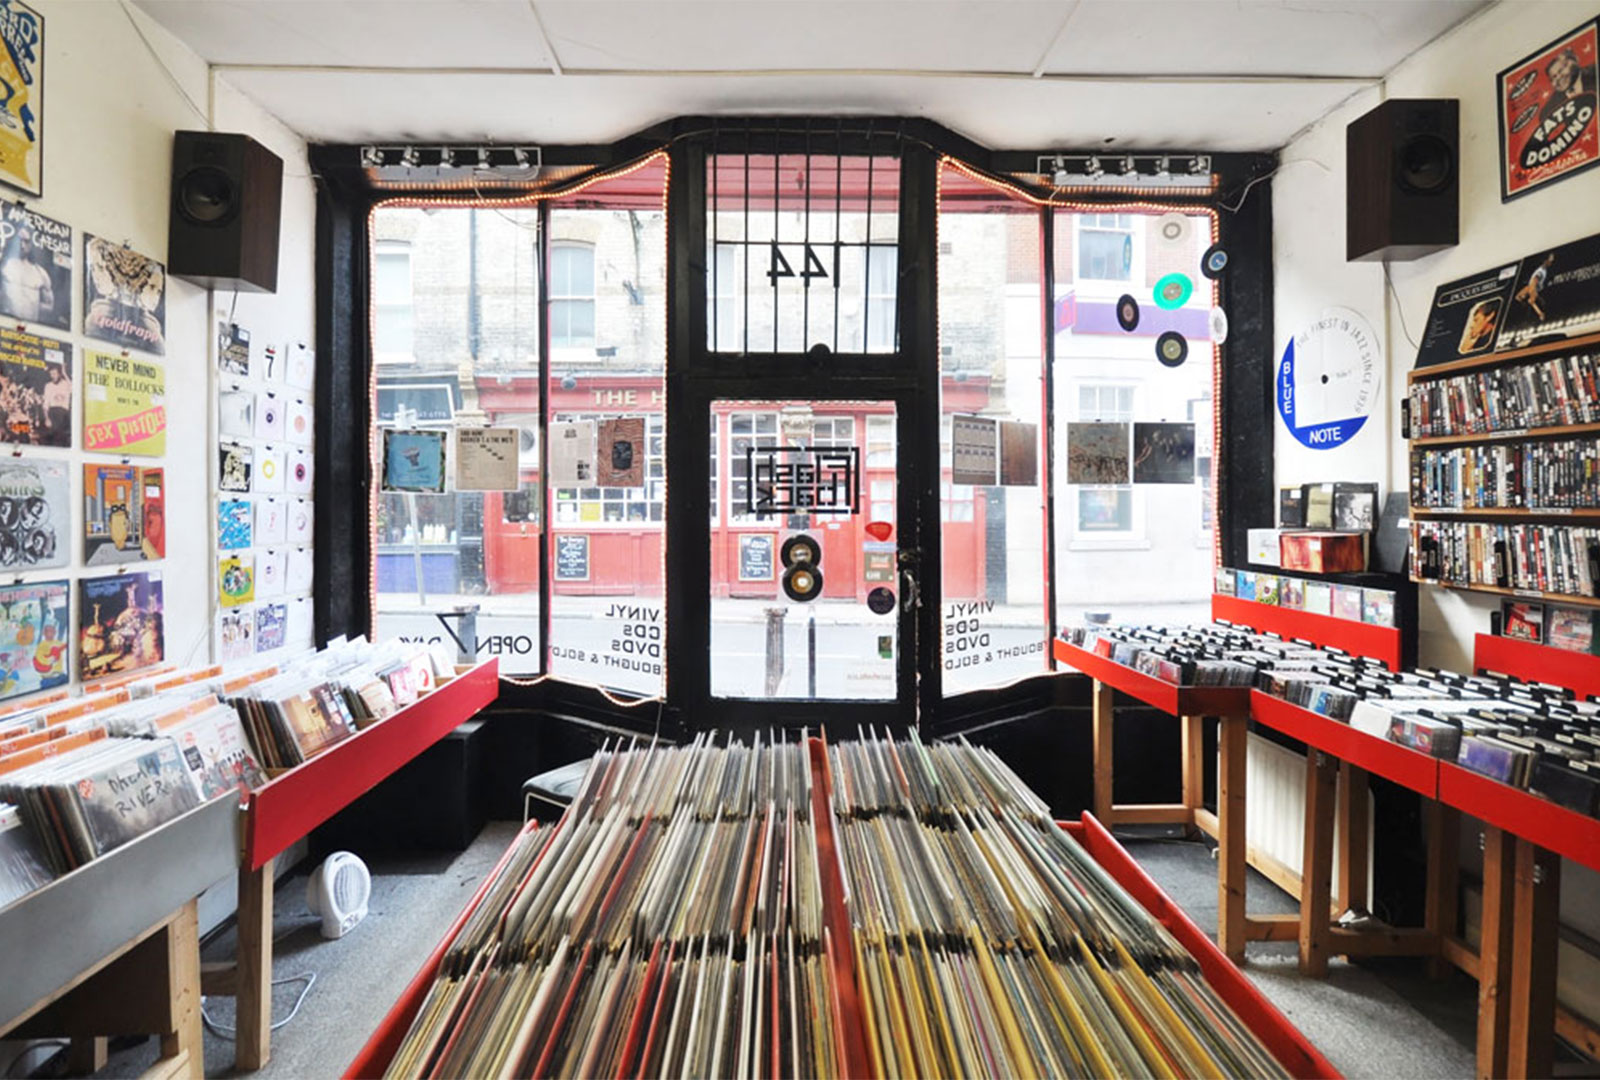 About Our Independent Record Store